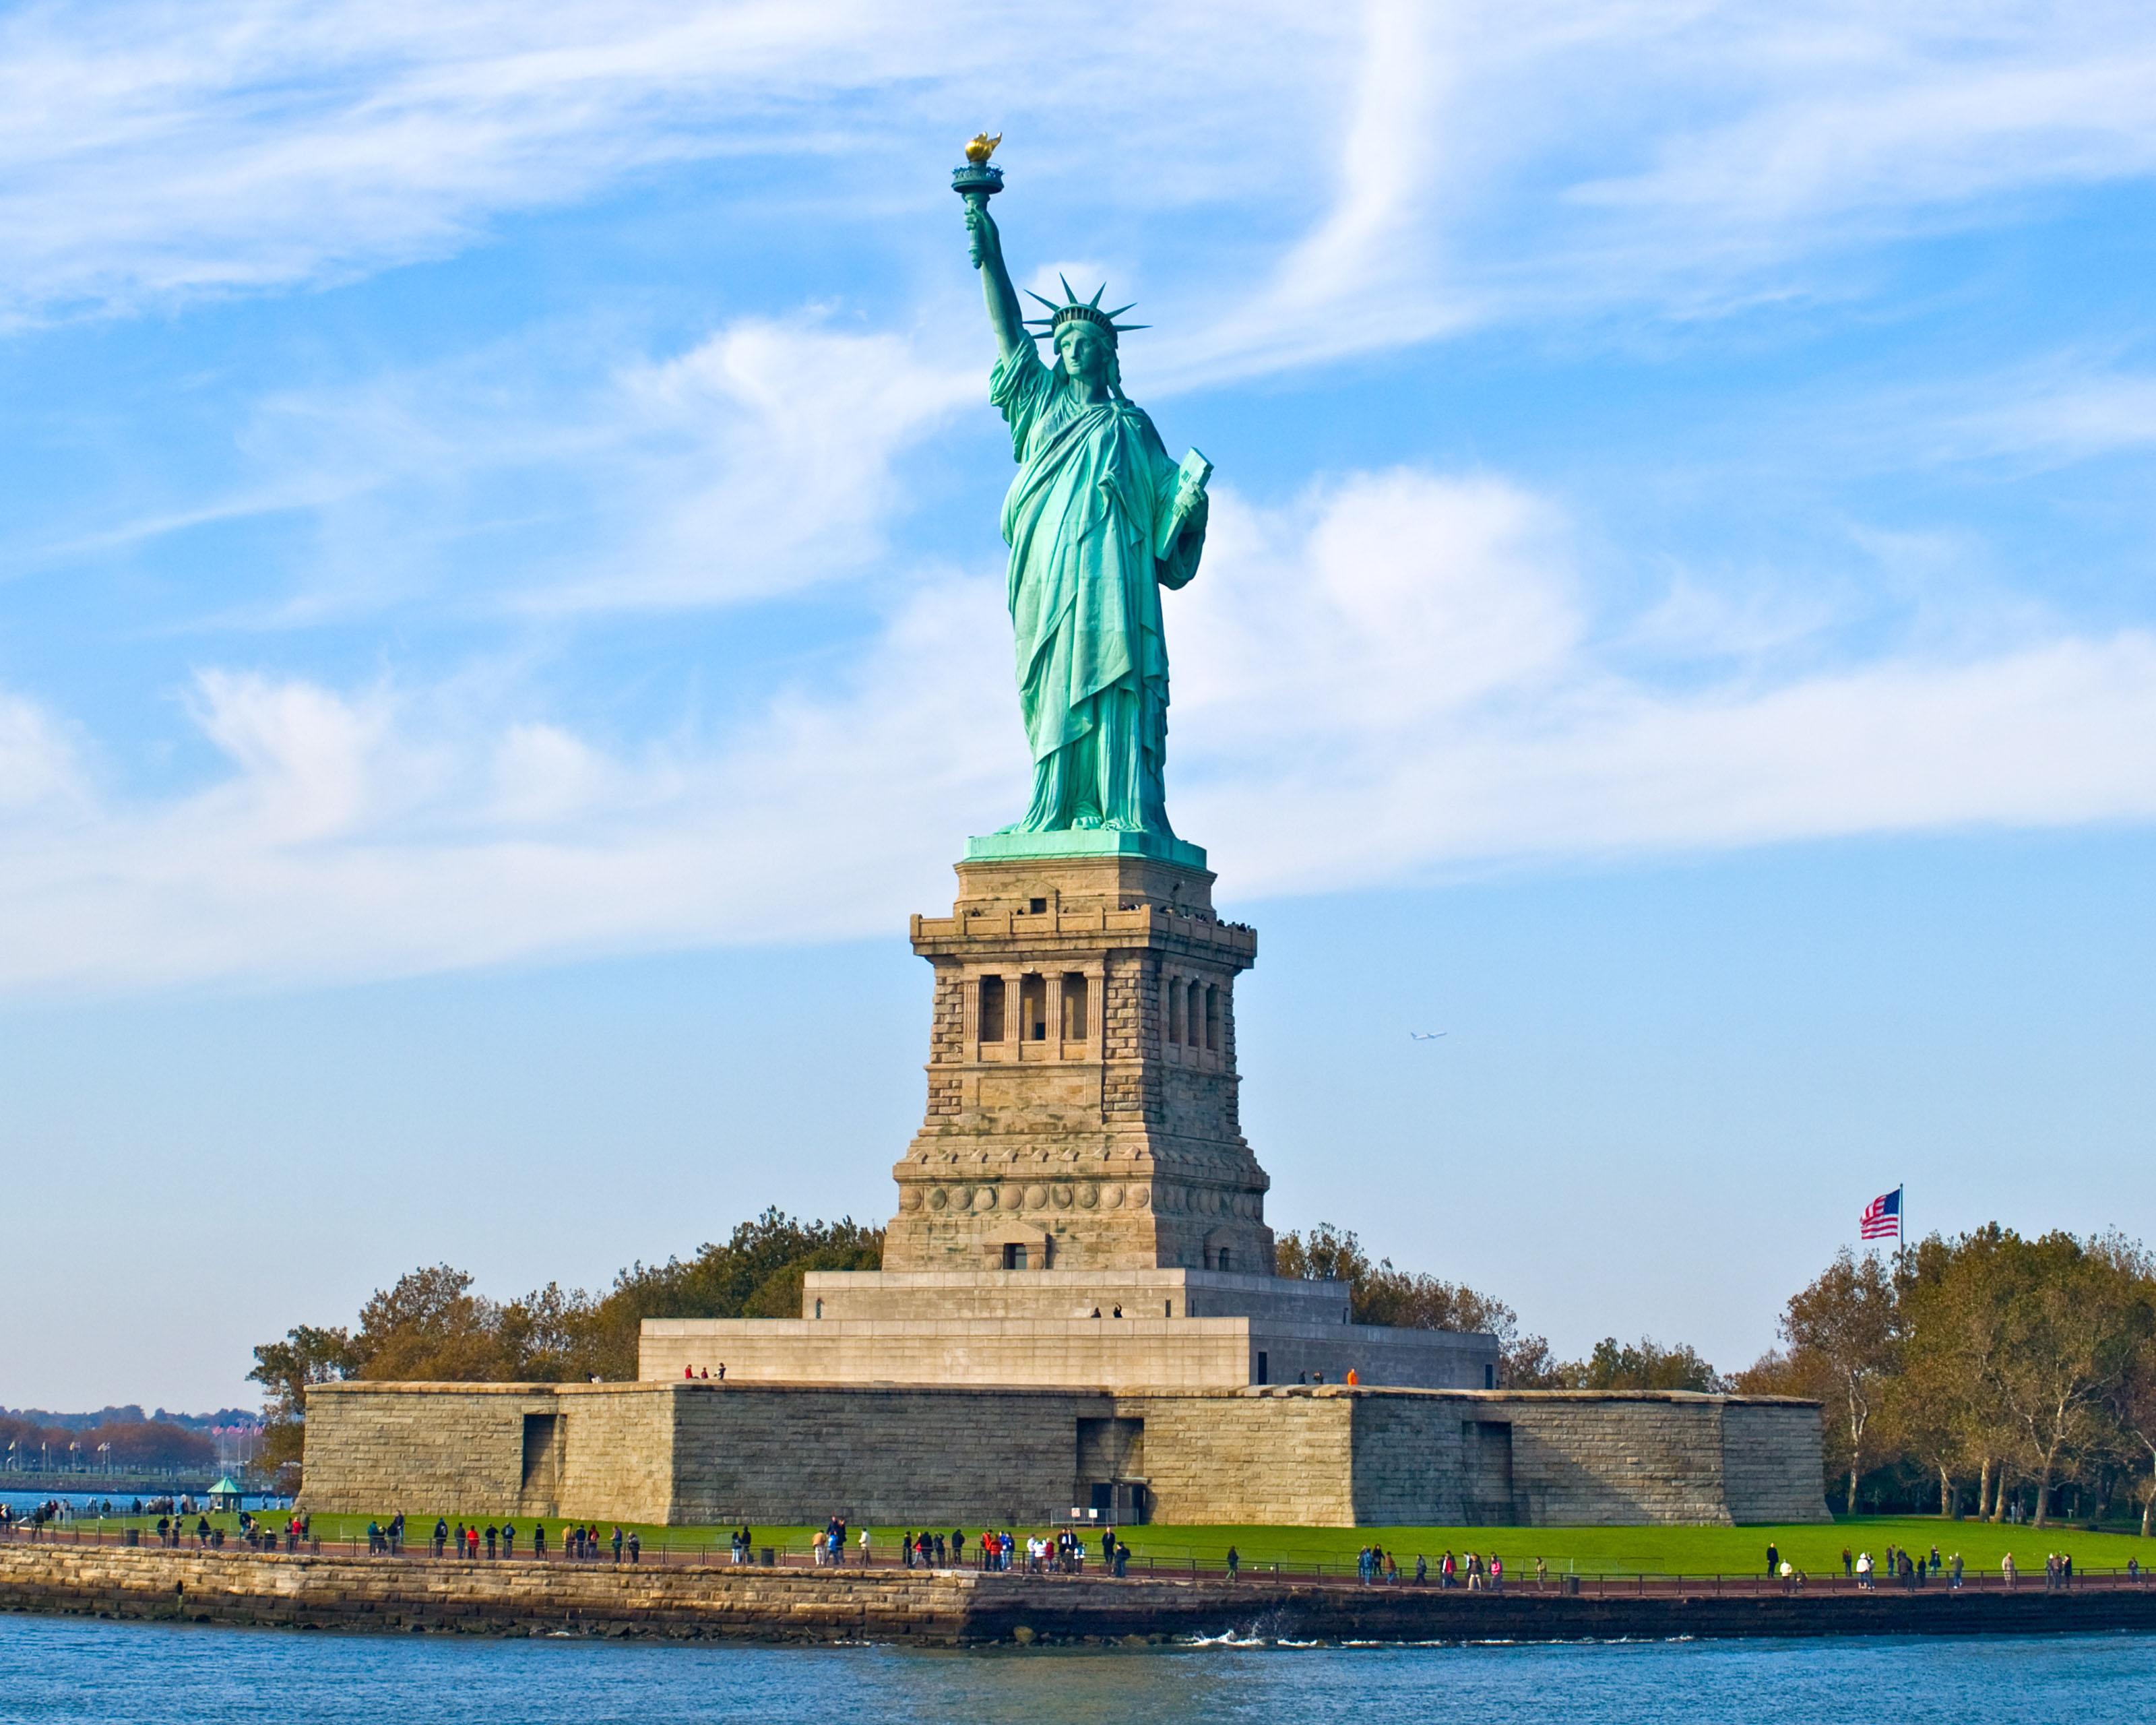 Download - Statue Of Liberty (#580501) - HD Wallpaper & Backgrounds ...